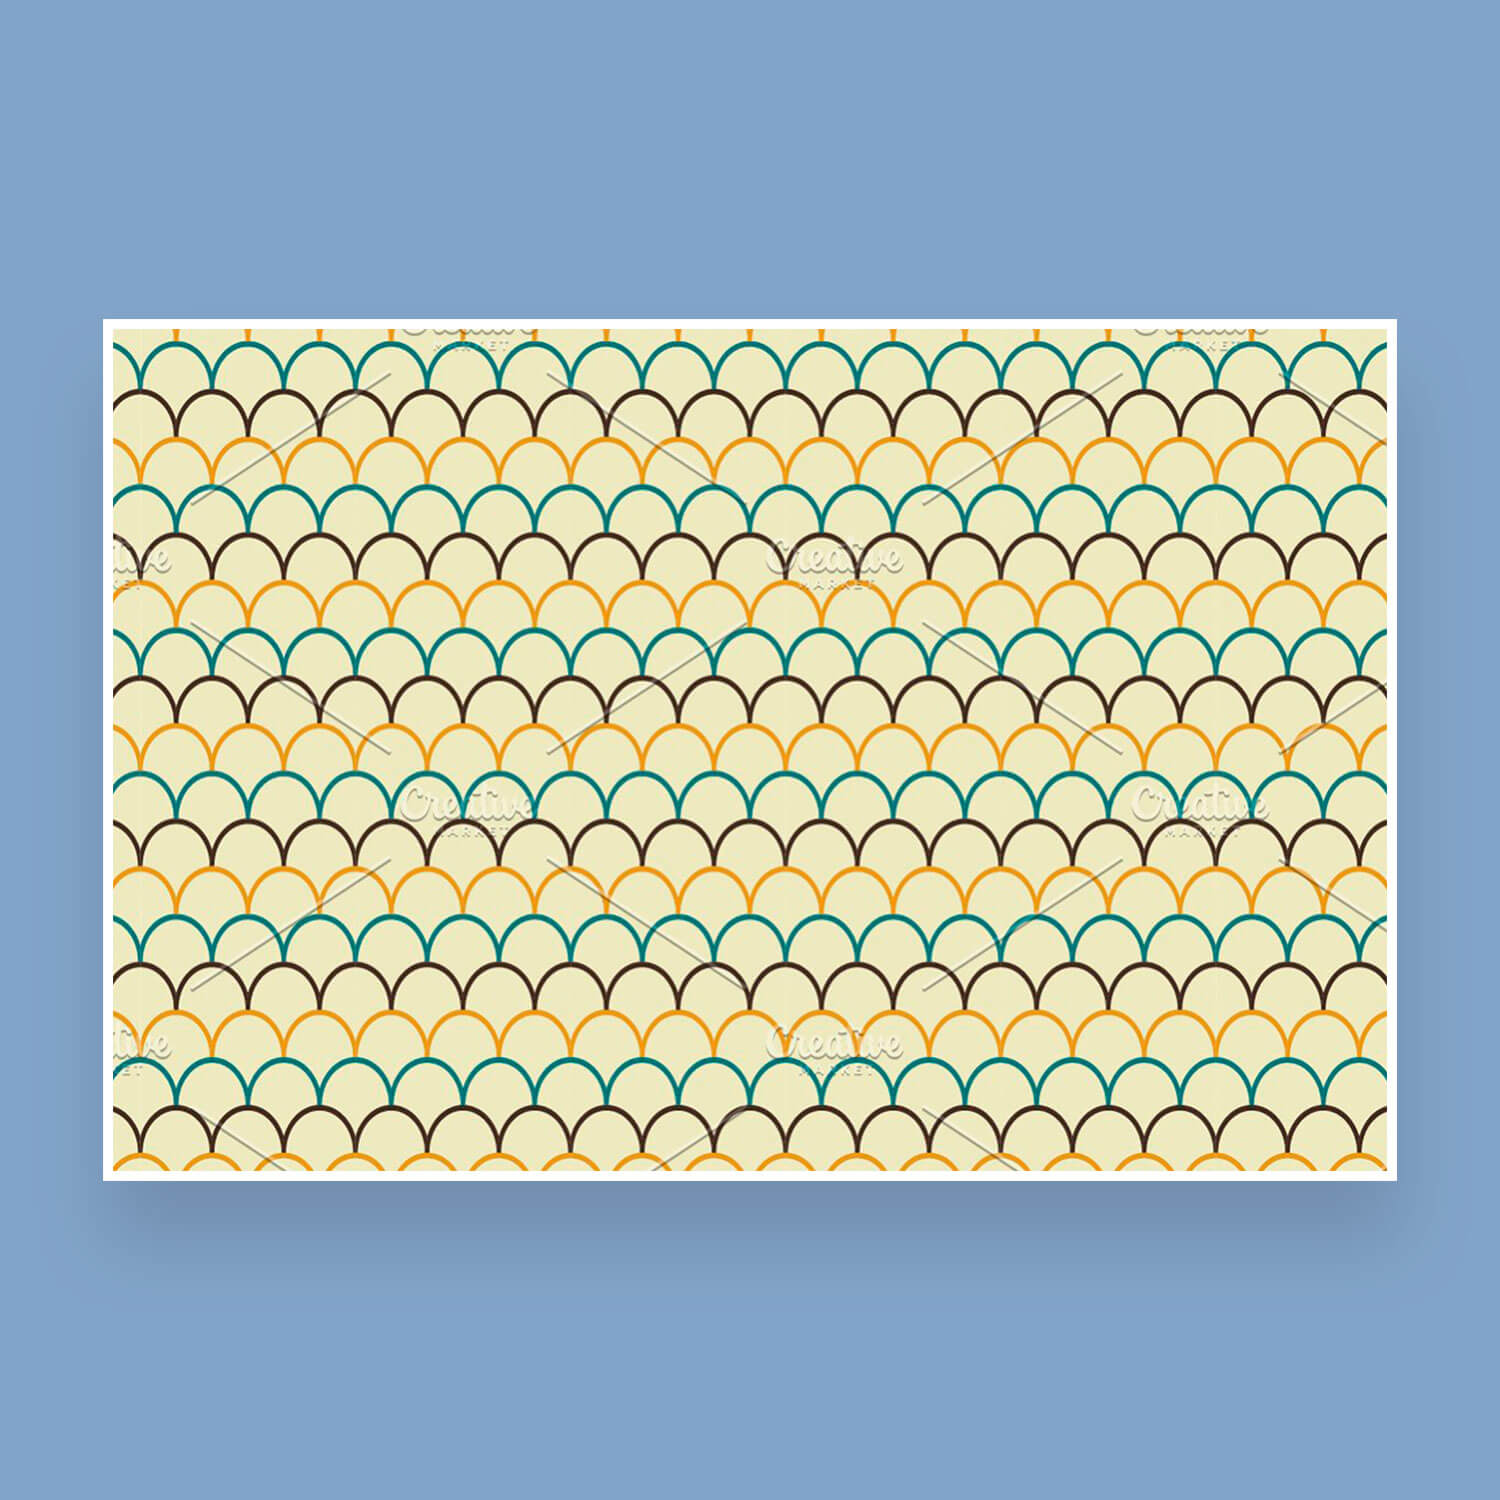 02 collection of retro patterns 1